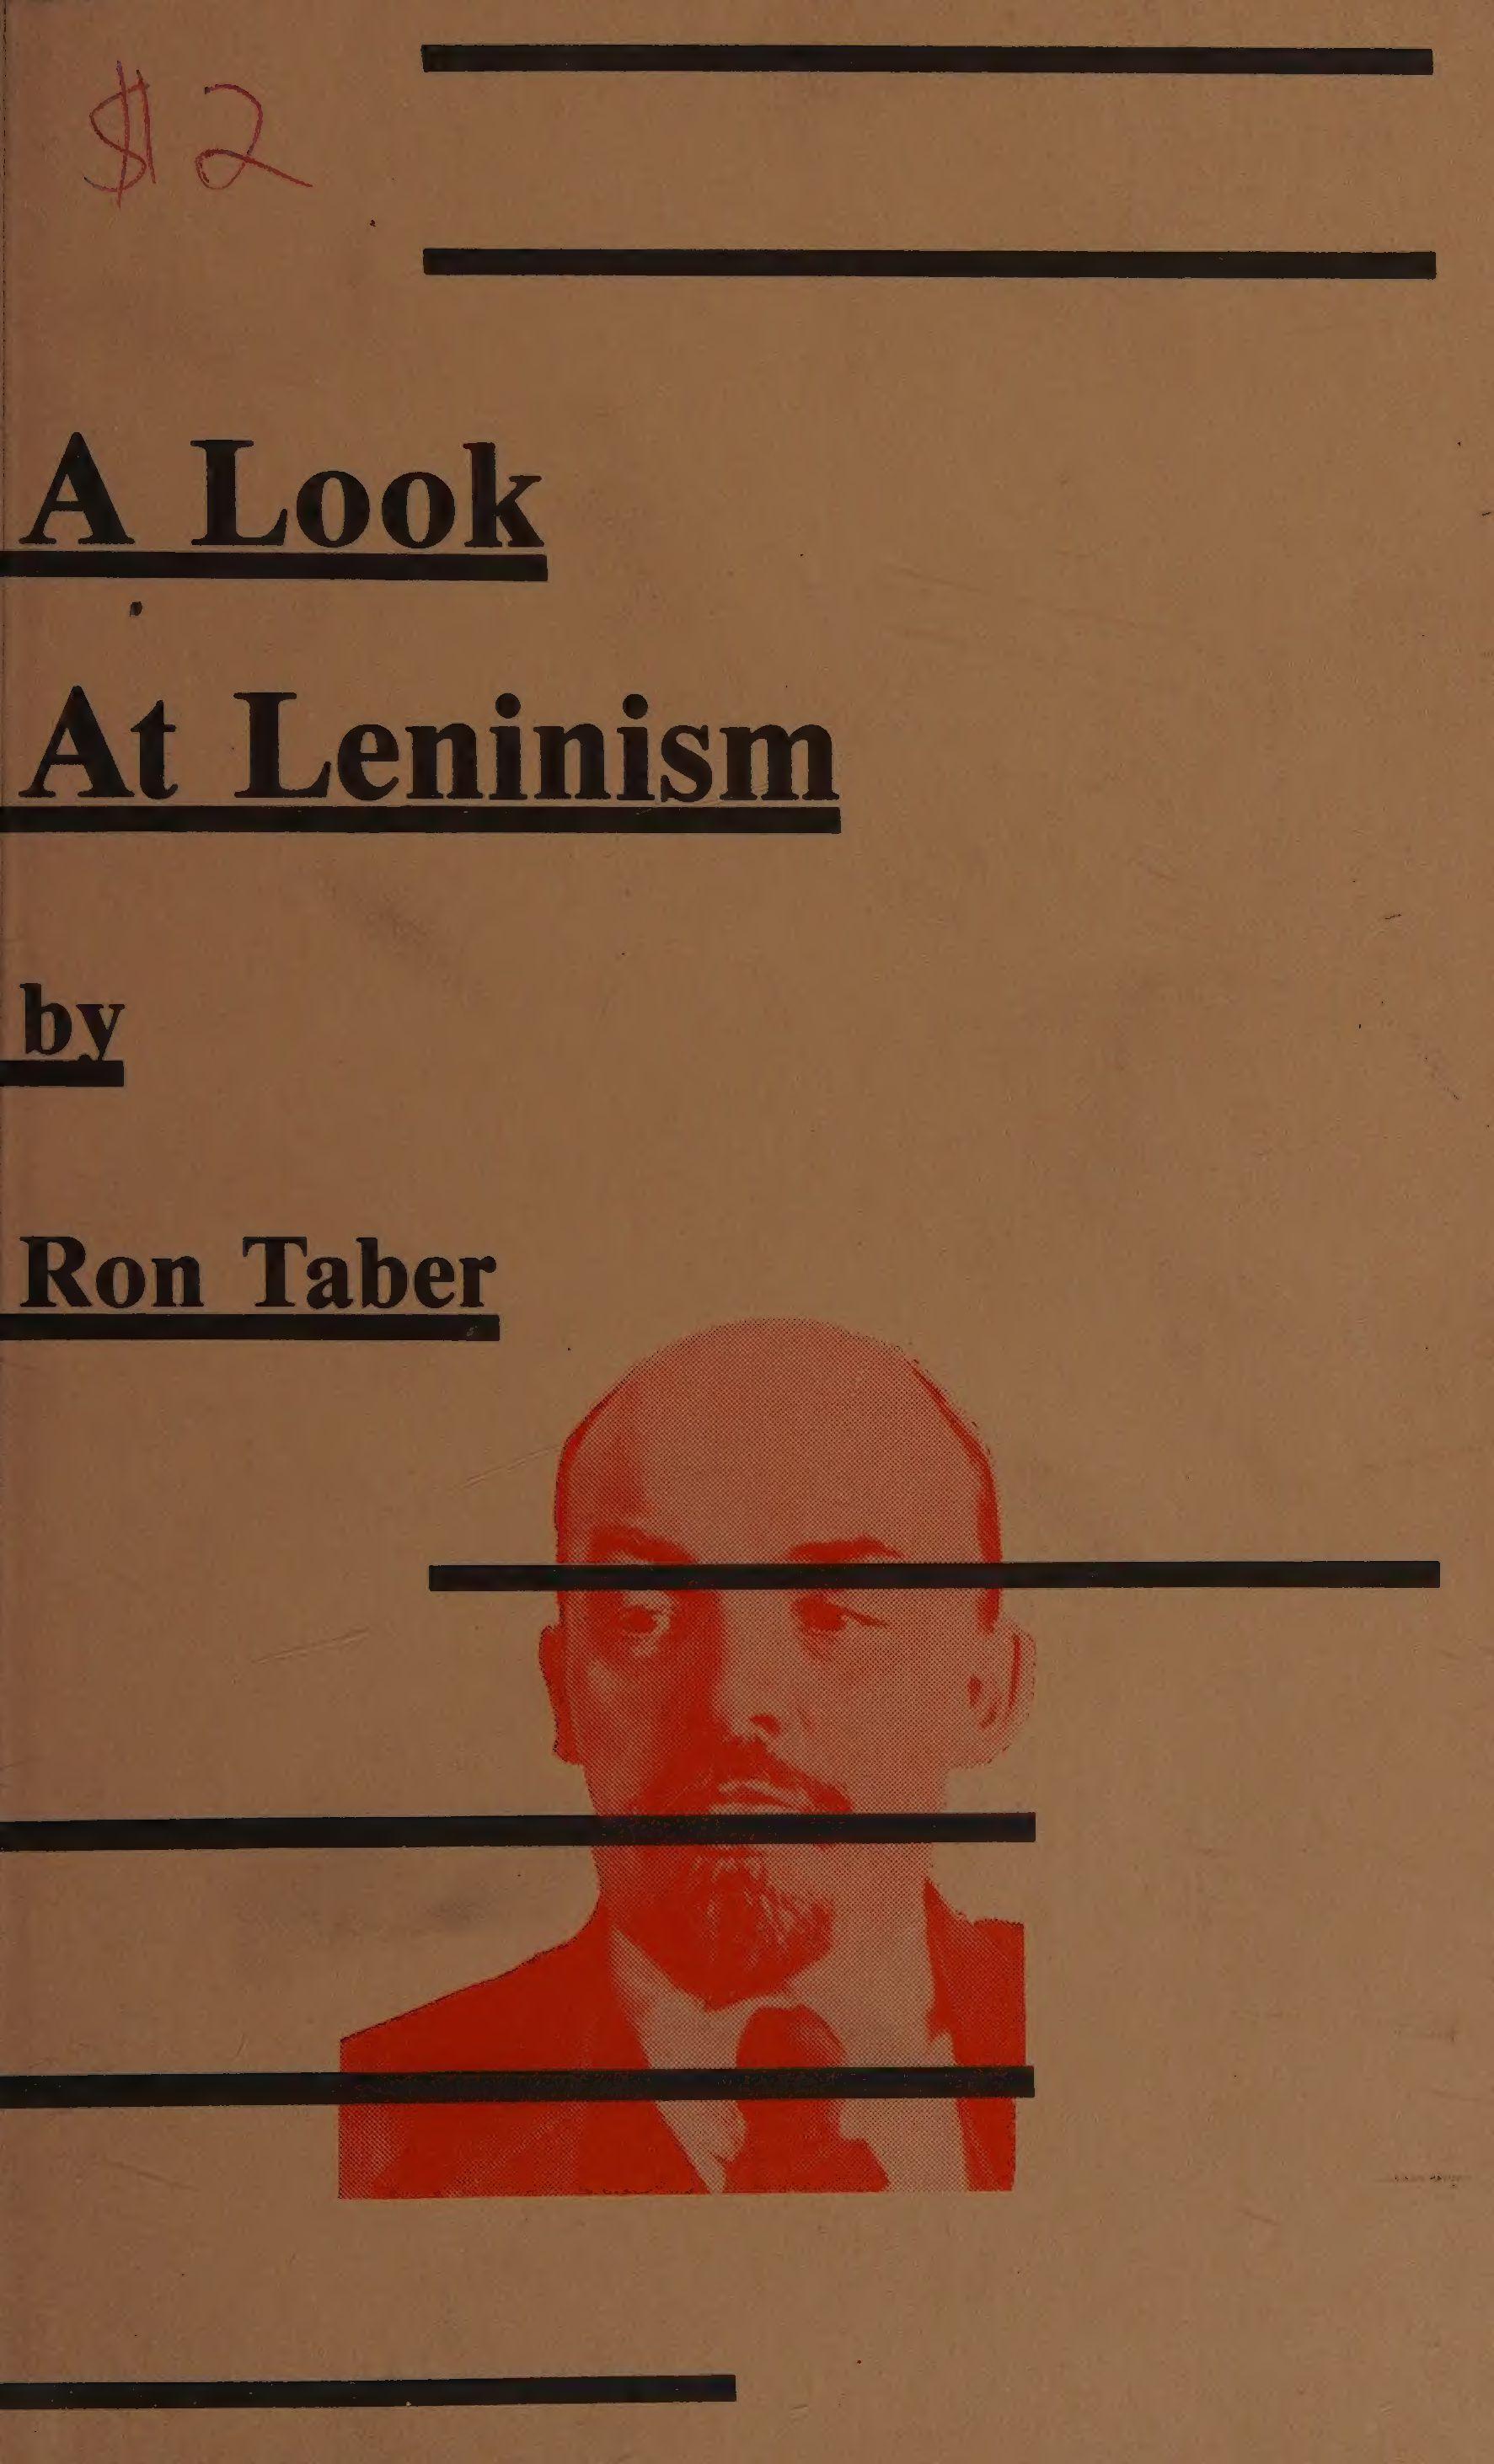 r-t-ron-tabor-a-look-at-leninism-1.jpg